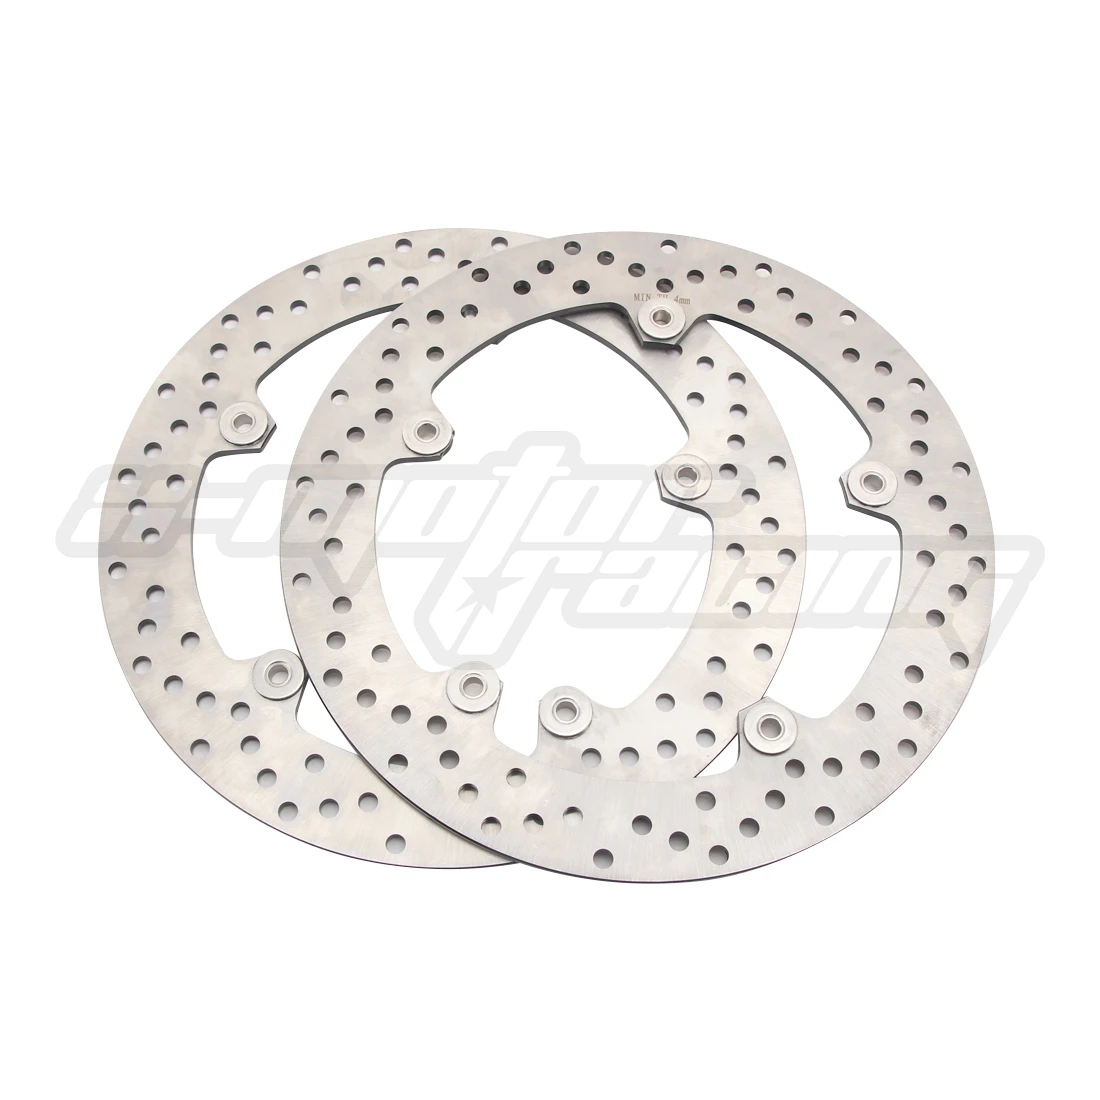 

Motorcycle Front Brake Discs Rotors For BMW R1200GS 2007 2008 2009 2010 2011 2012 305mm 4.5mm